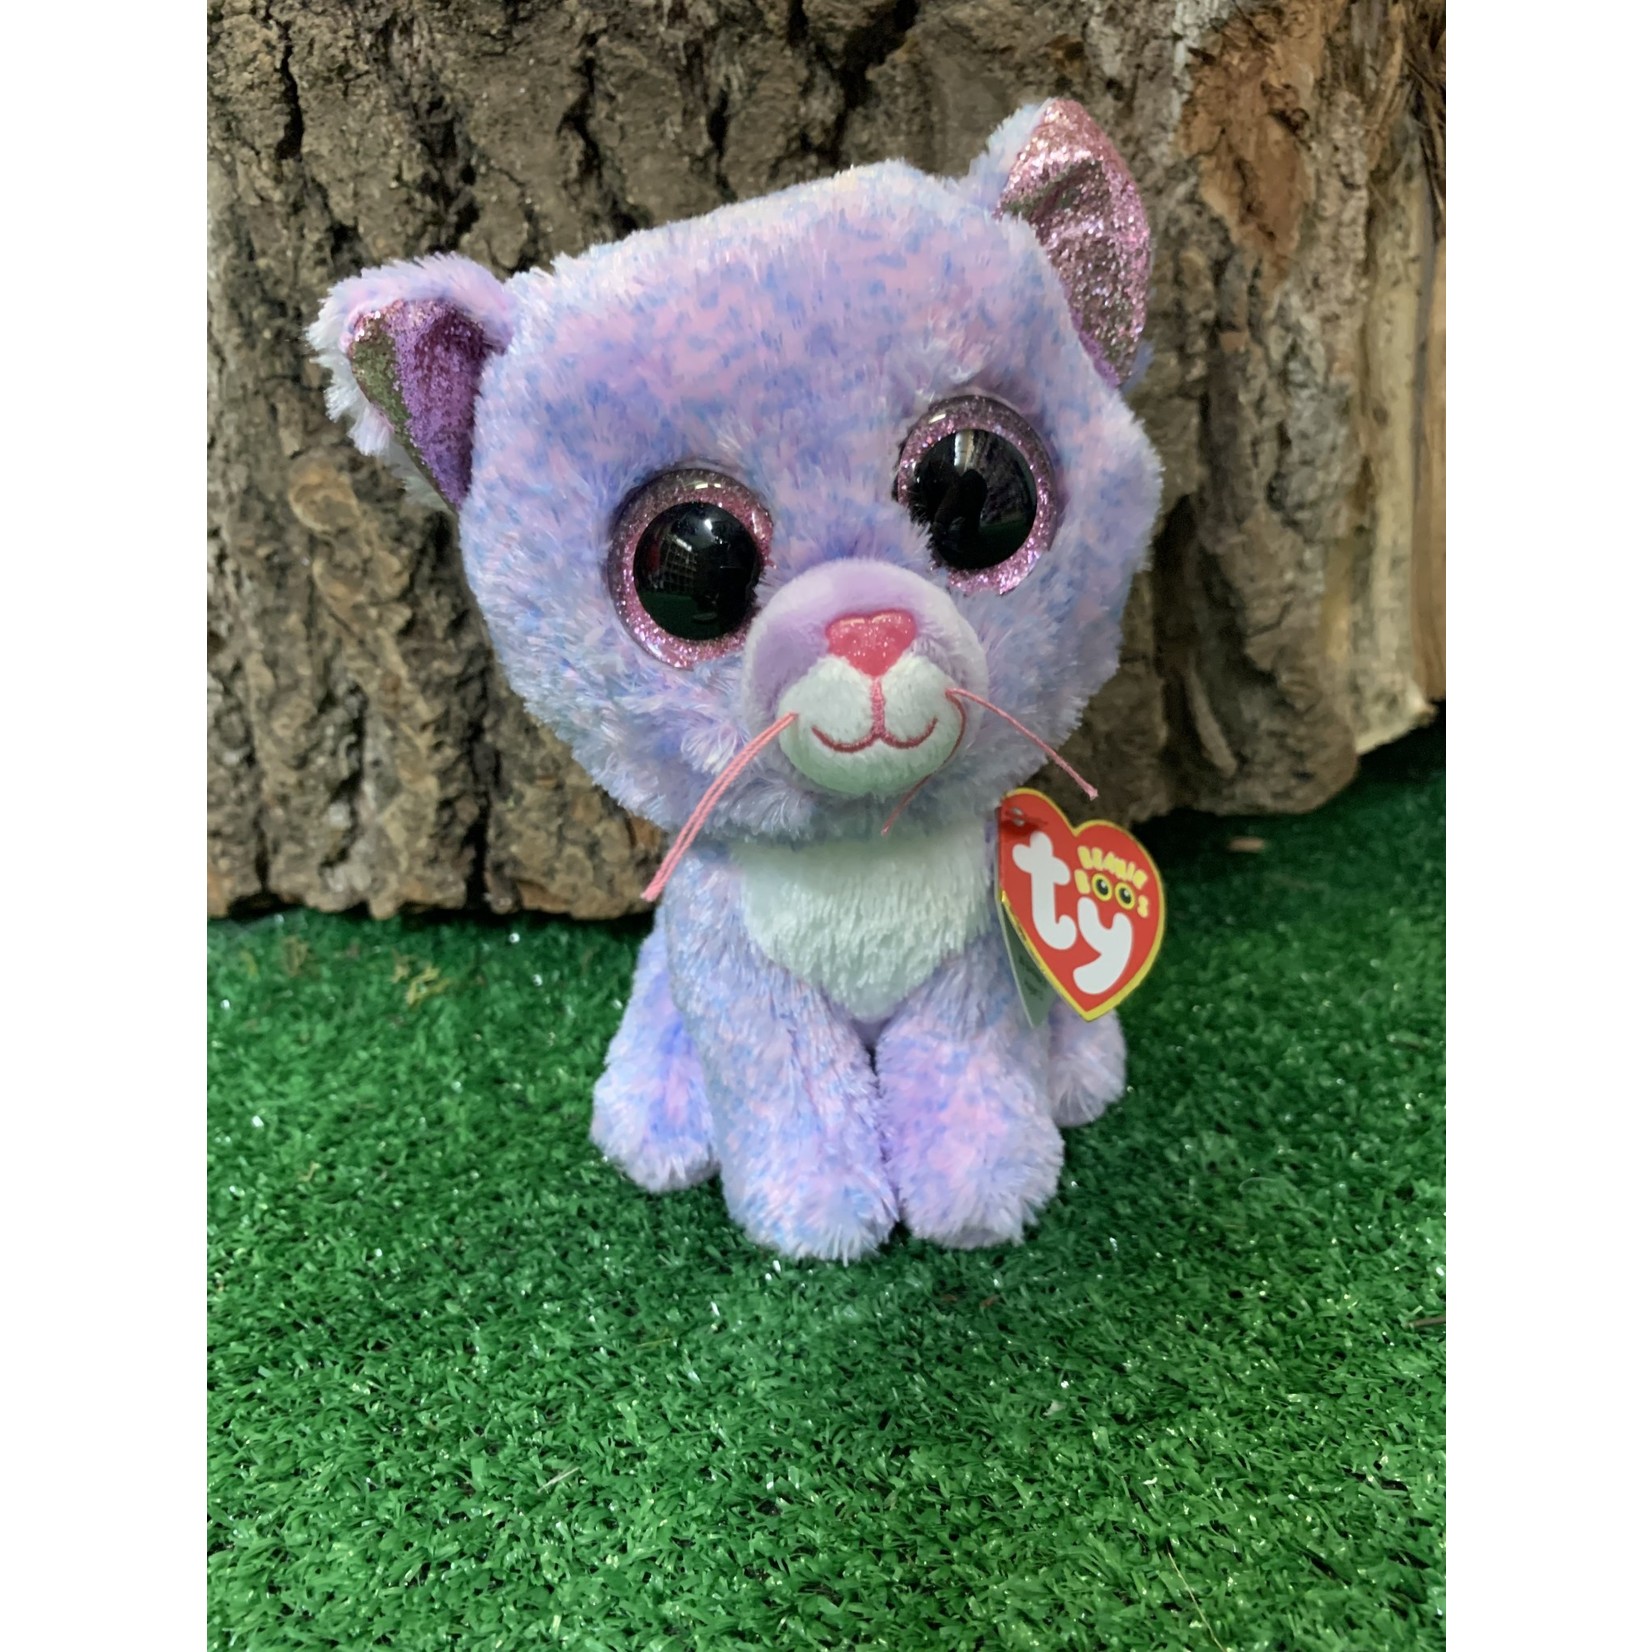 Beanie Boo - Cassidy the Lavender Cat - Celebrations and Toys